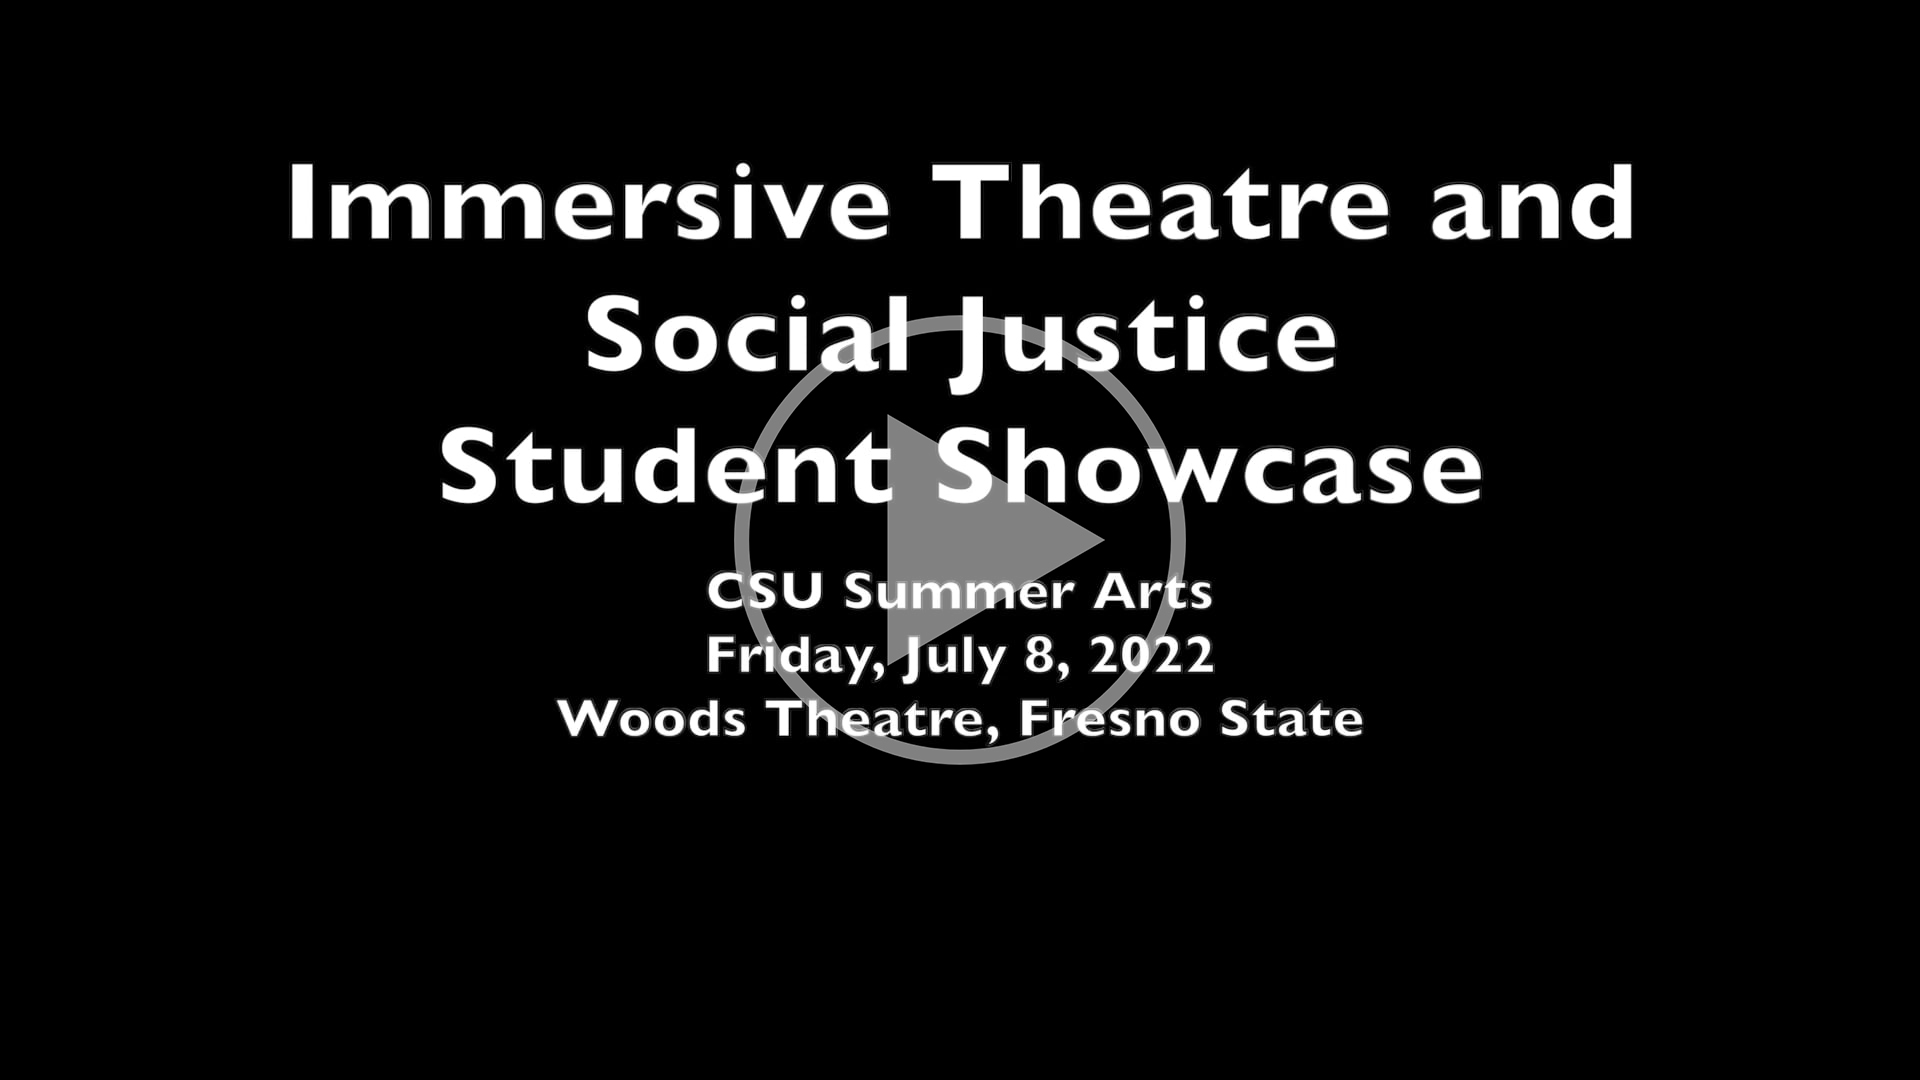 Play the 'Immersive Theatre and Social Justice Student Showcase'